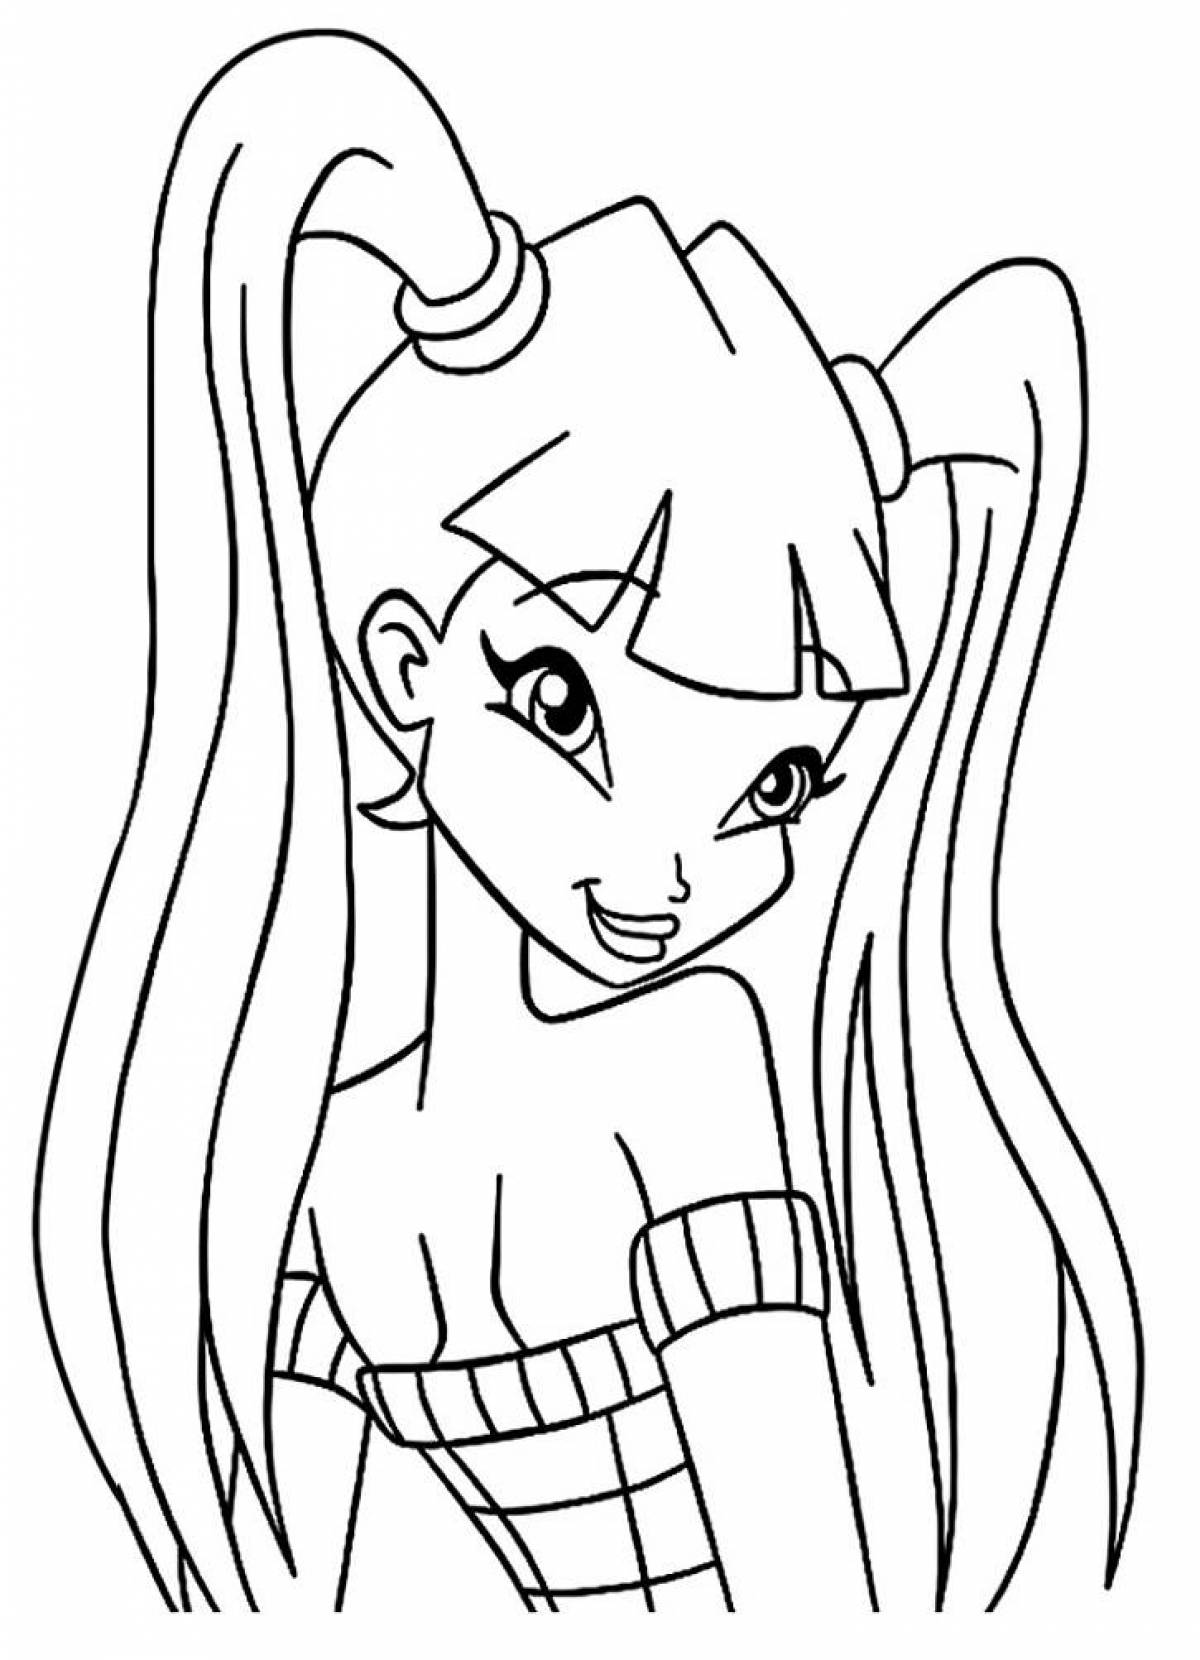 Coloring-imagination coloring page